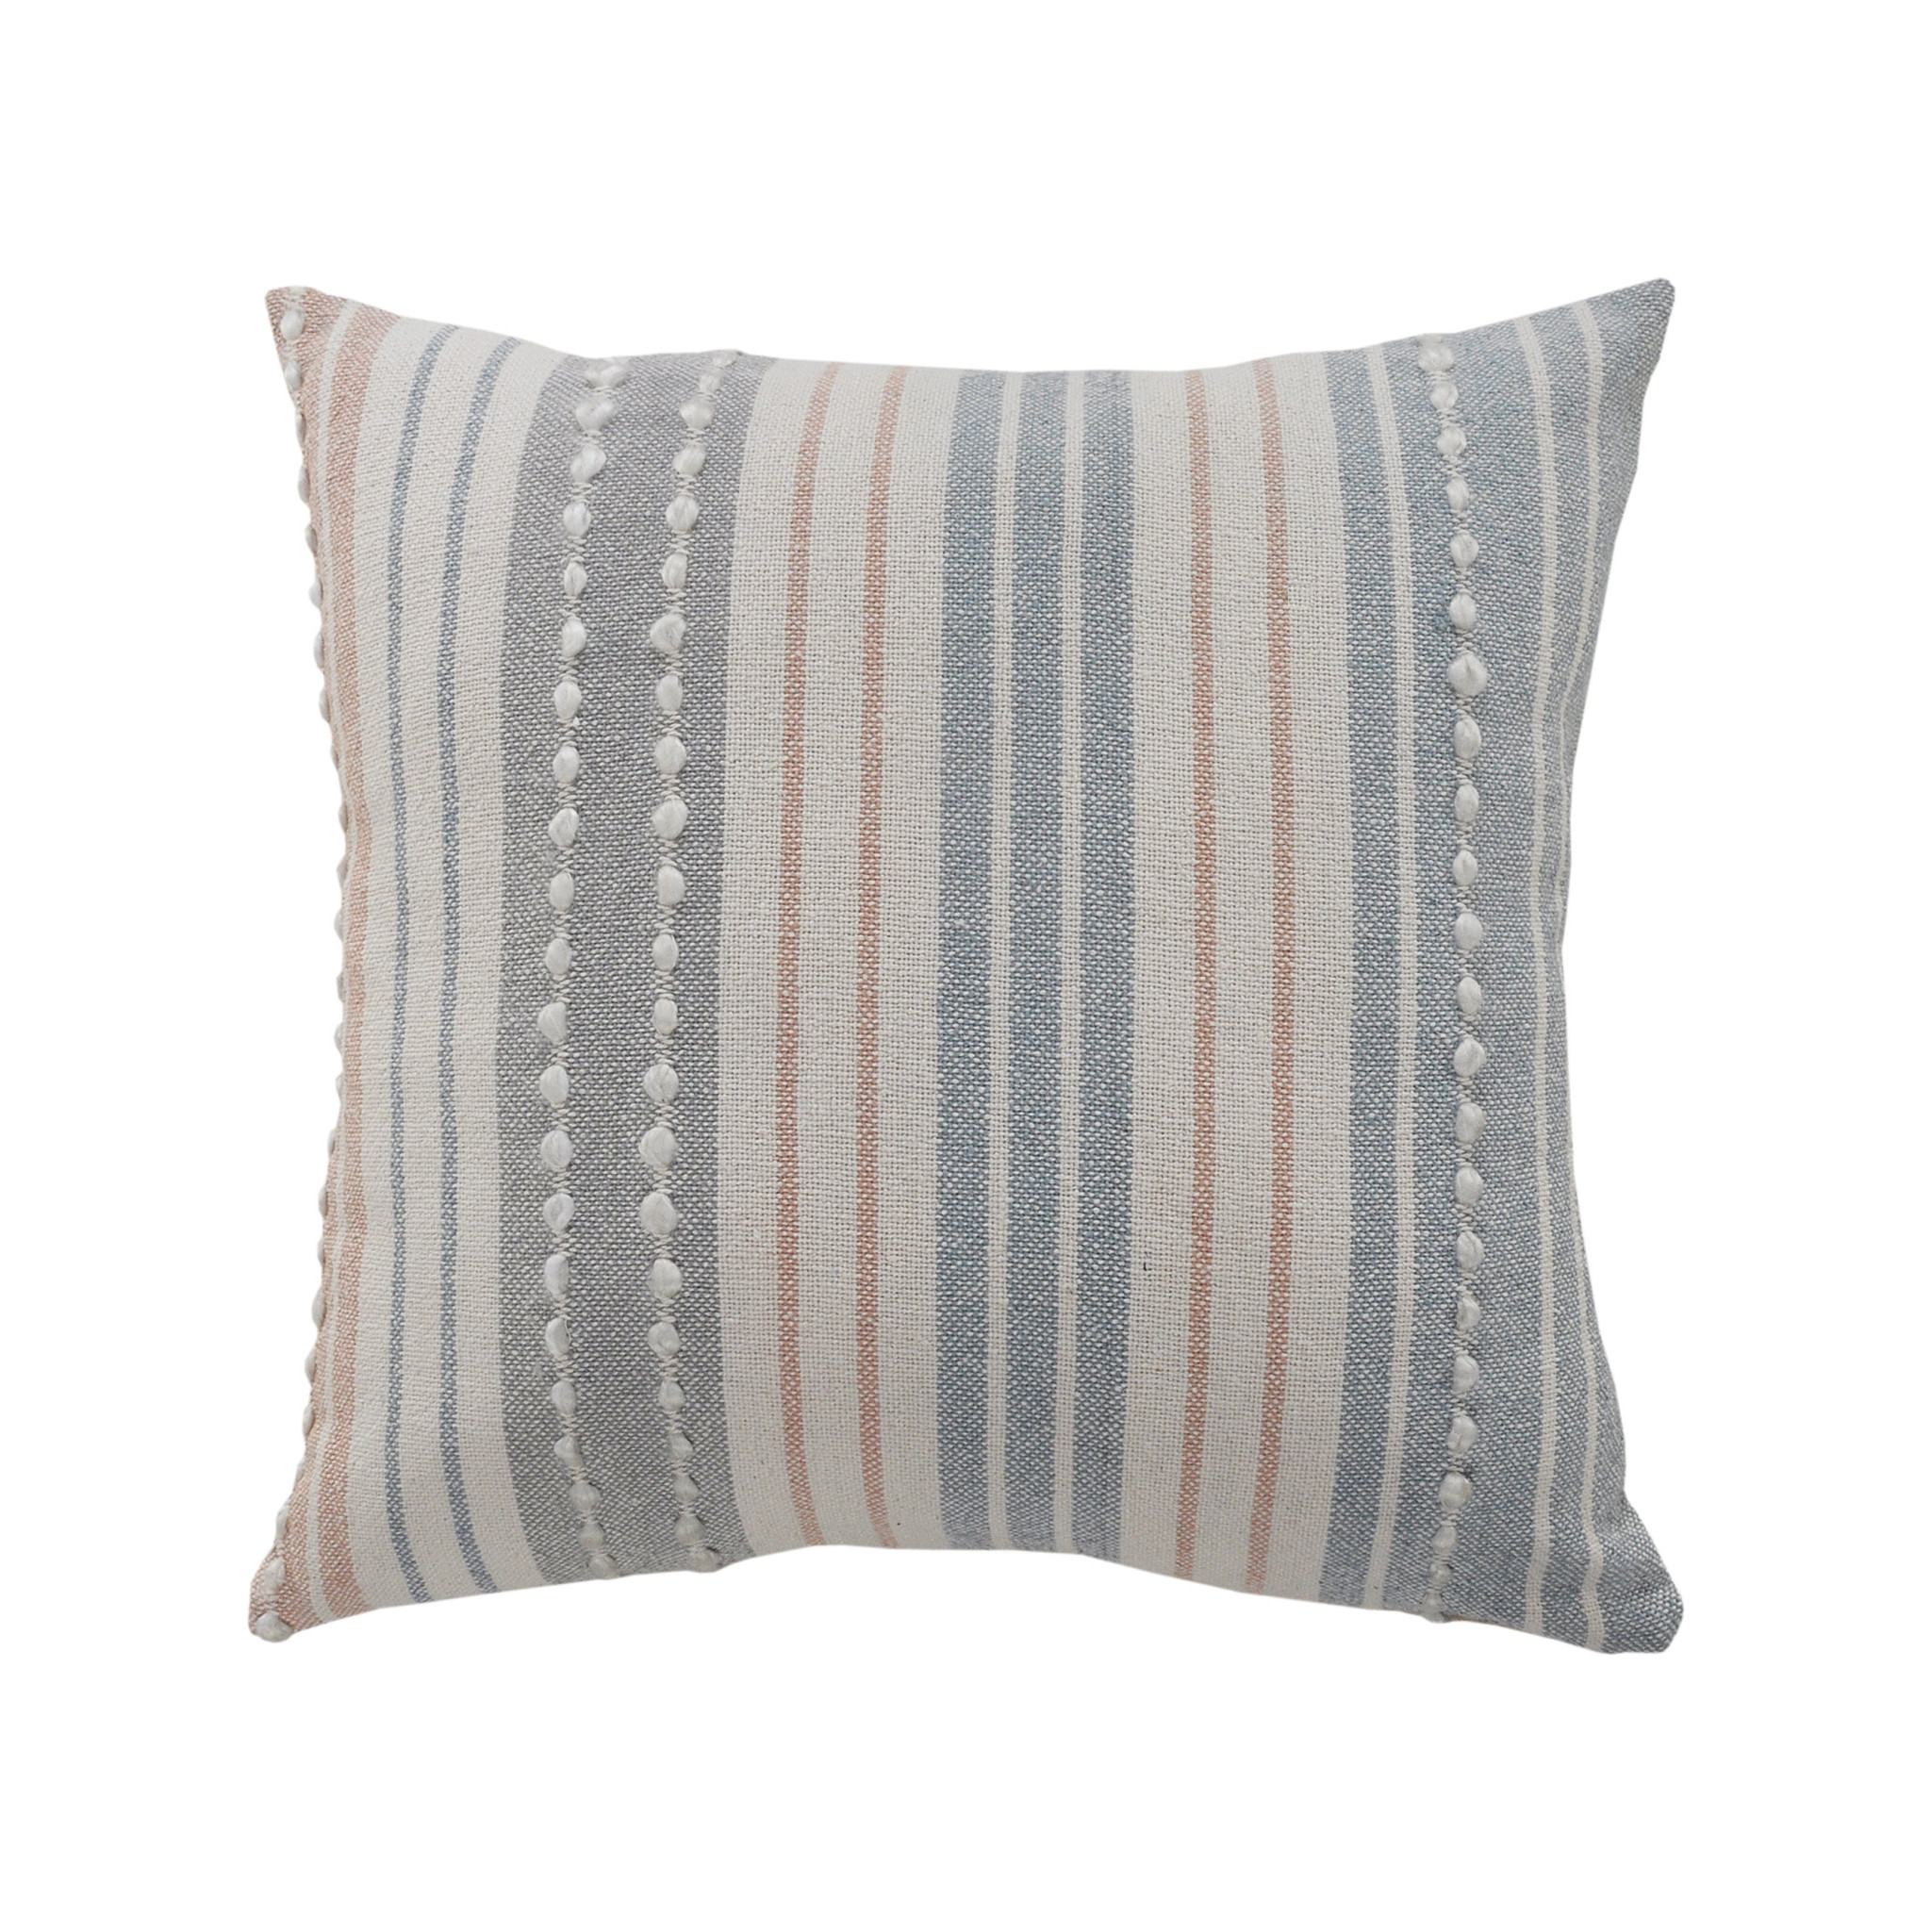 20" X 20" White Blue Gray And Tan 100% Cotton Striped Zippered Pillow-516782-1